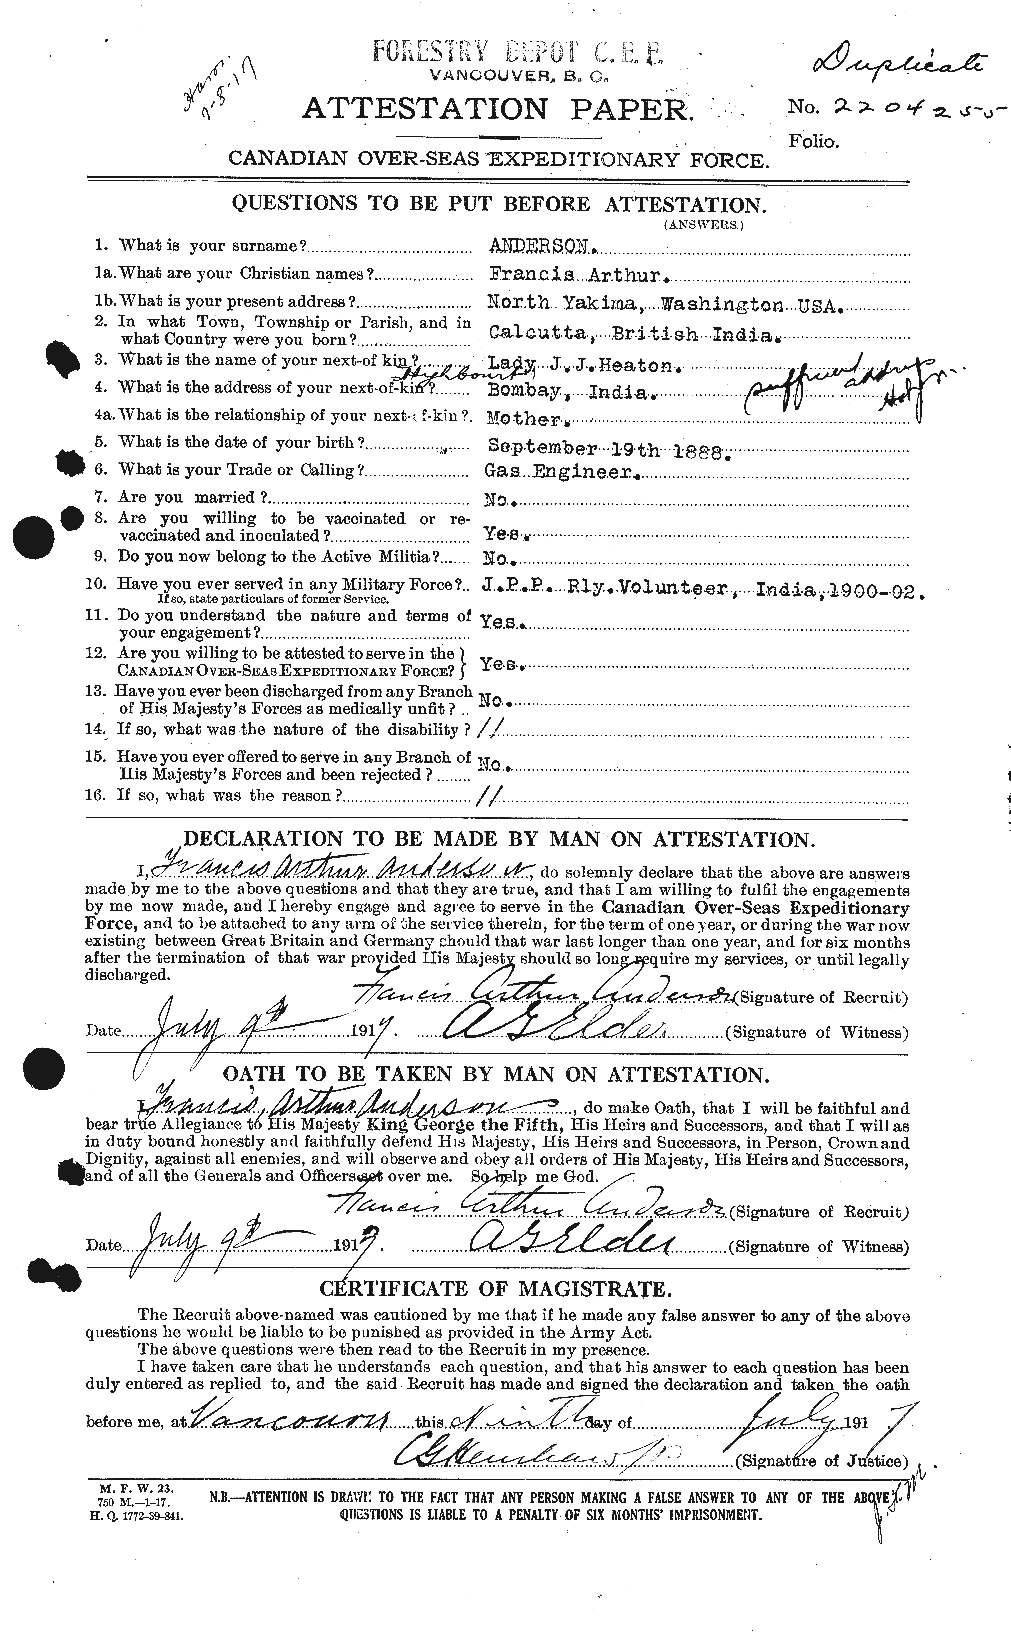 Personnel Records of the First World War - CEF 209866a